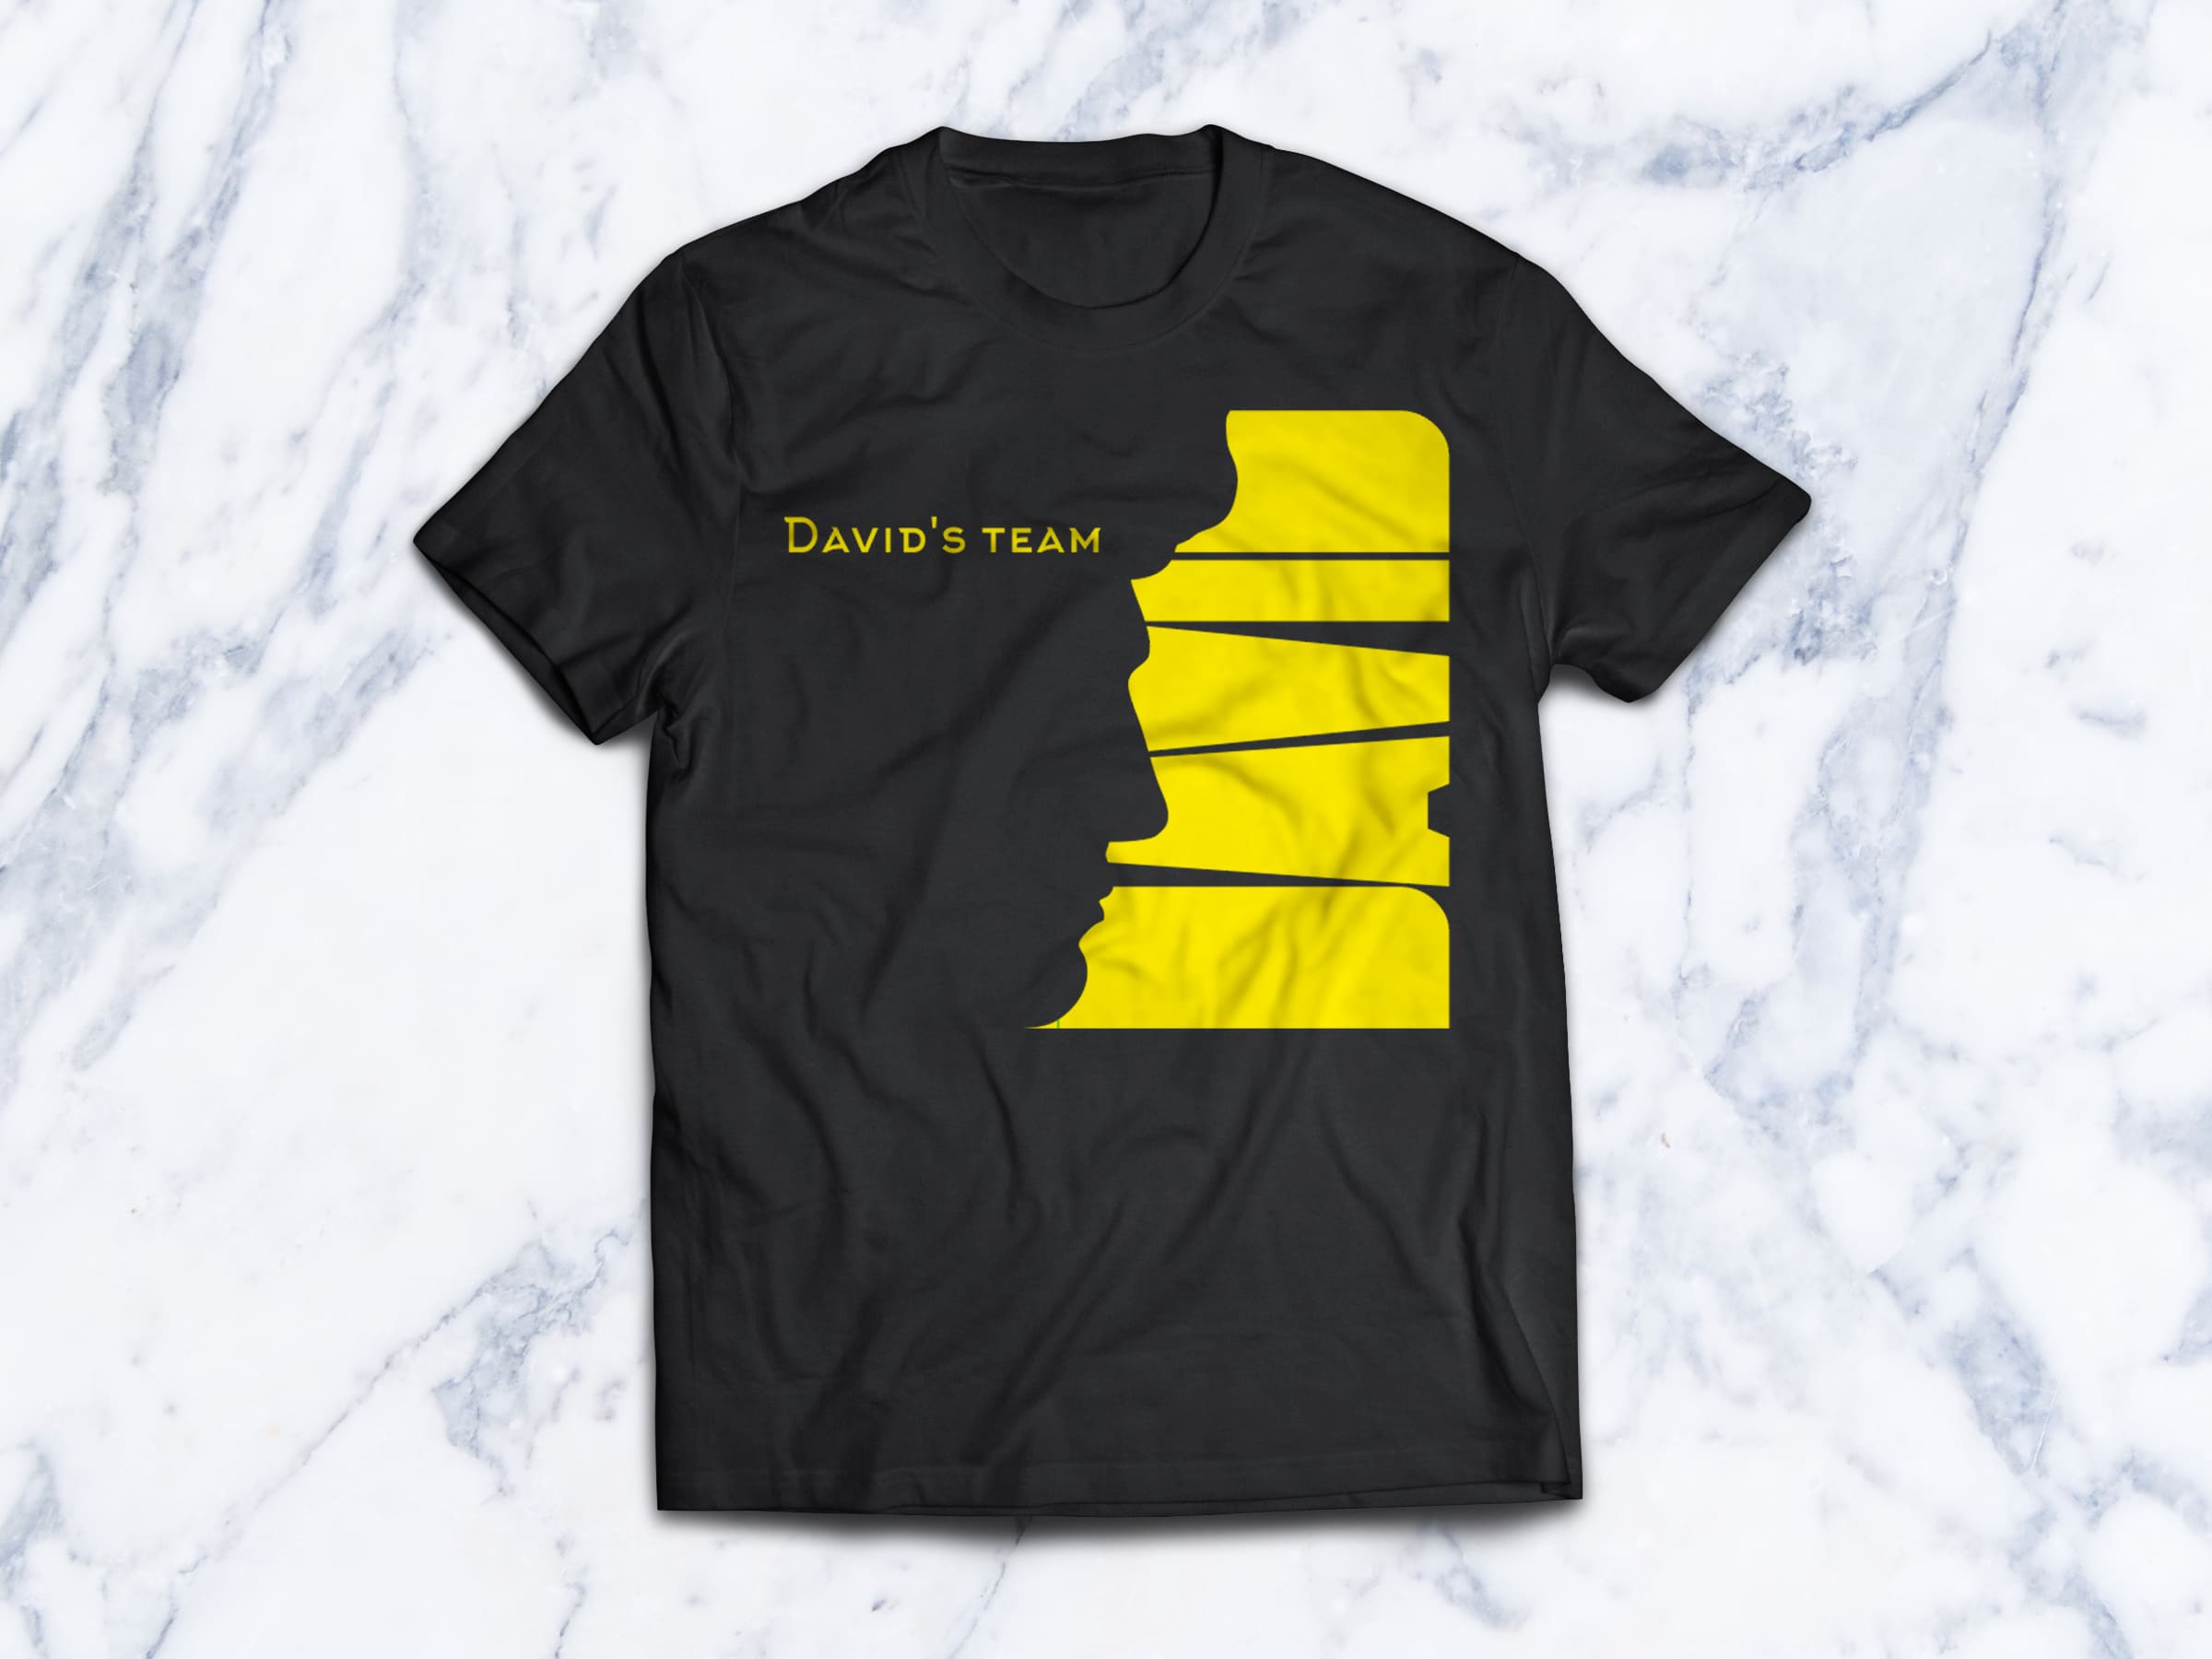 T-shirt in black color with yellow font and graphic.